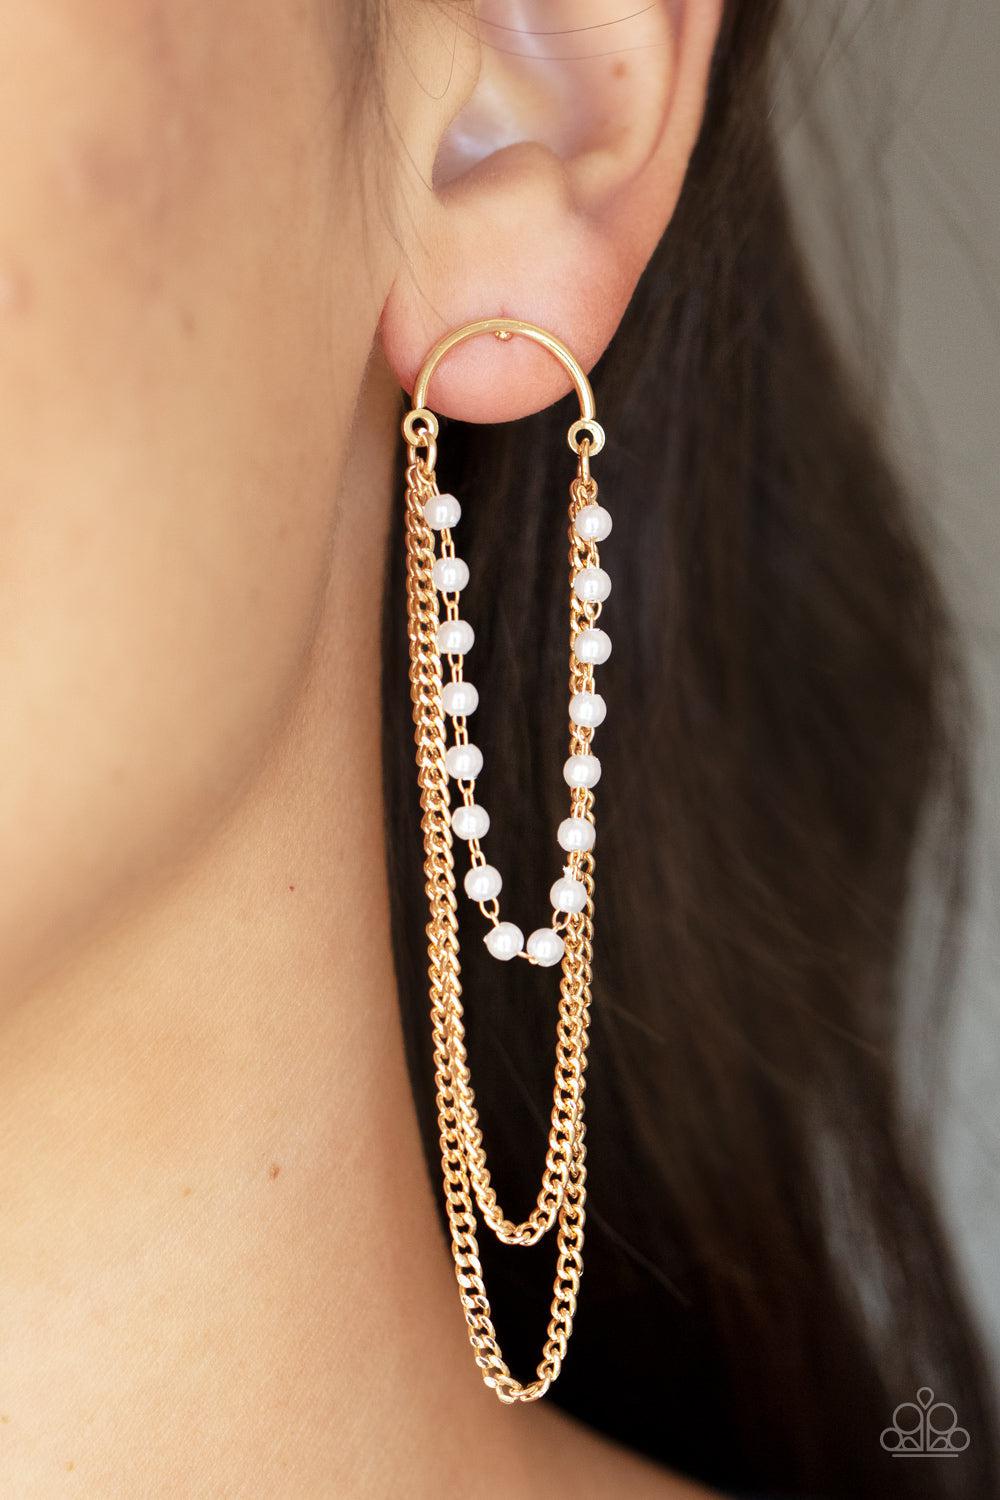 Vintage VIP Gold and White Pearl Earrings - Paparazzi Accessories-on model - CarasShop.com - $5 Jewelry by Cara Jewels